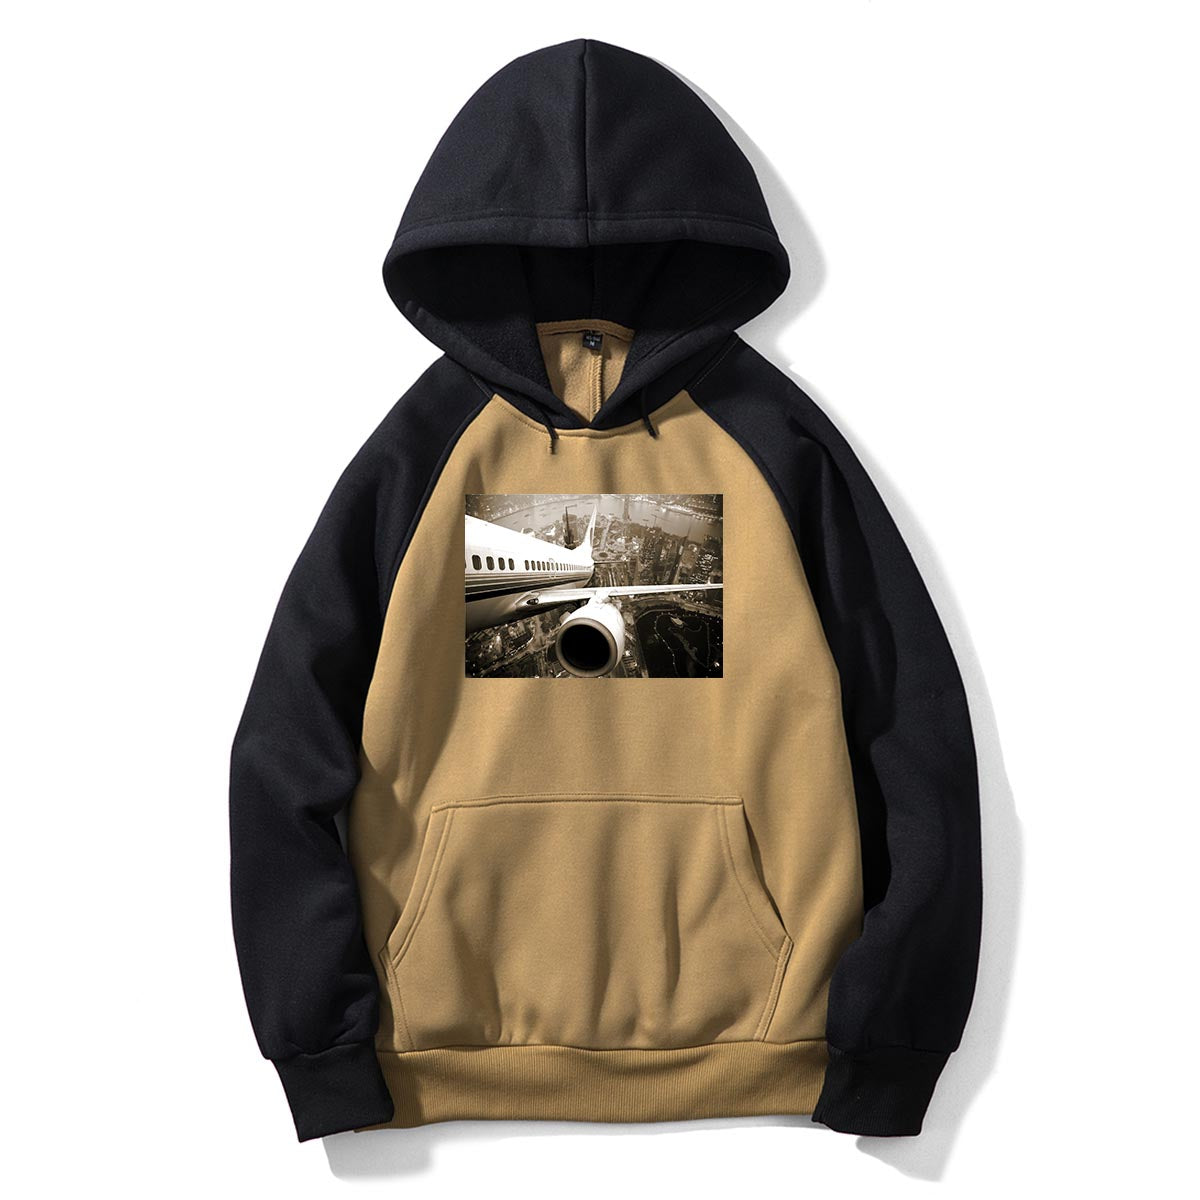 Departing Aircraft & City Scene behind Designed Colourful Hoodies